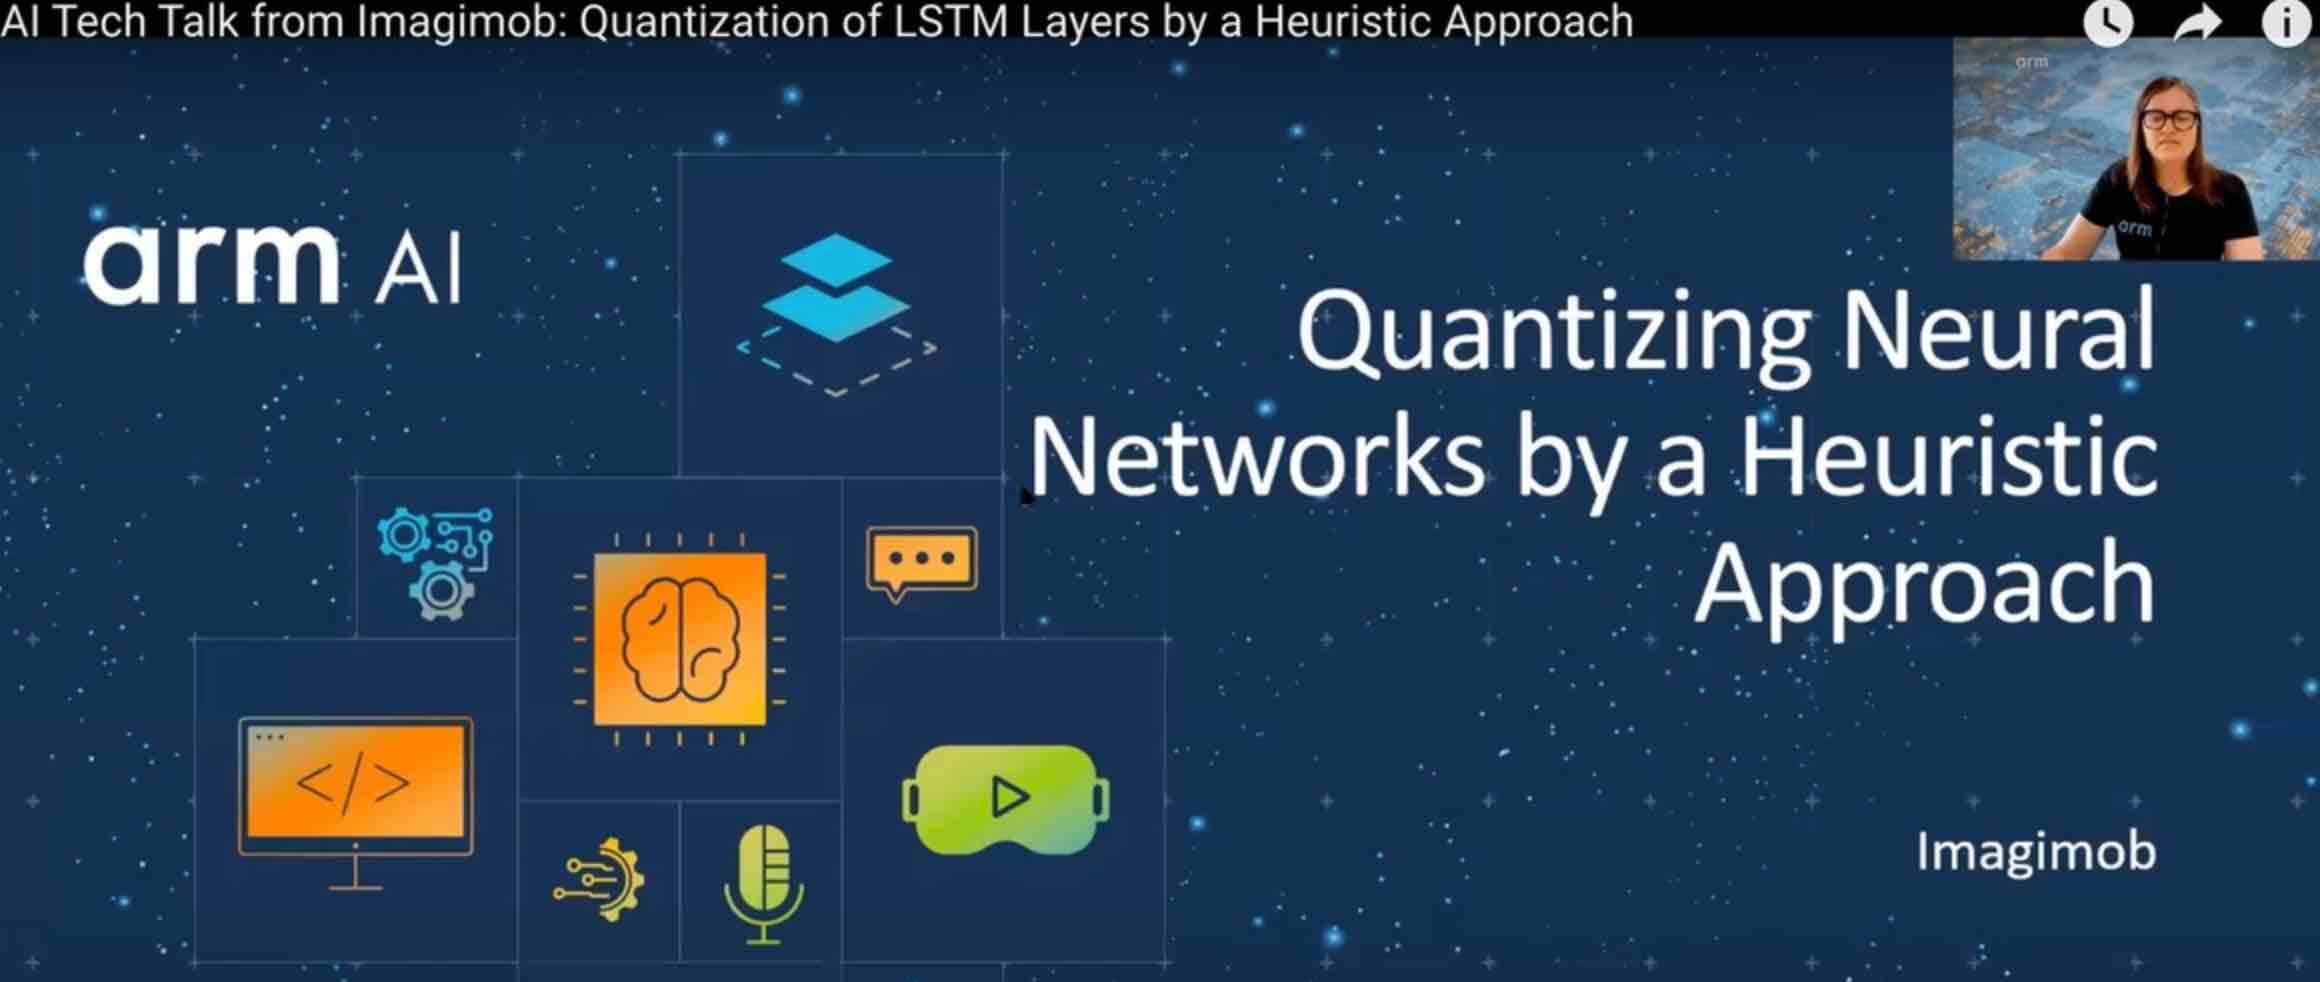 Quantization of LSTM Layers by a Heuristic Approach